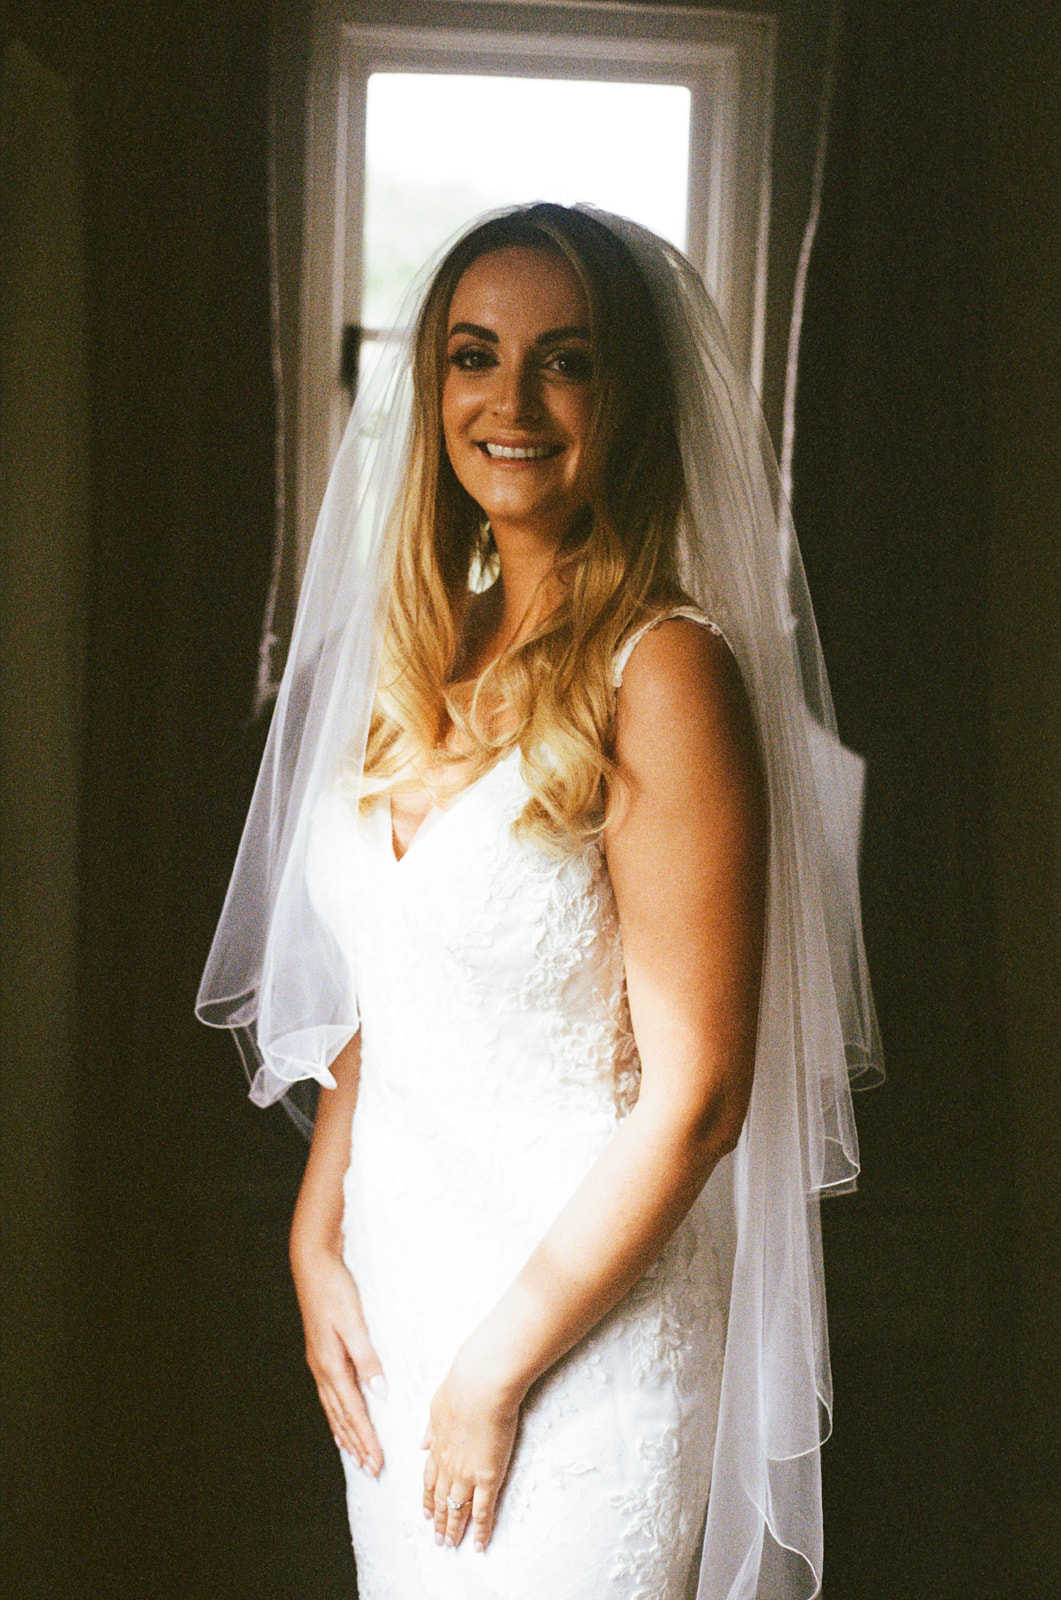 final moments before the wedding at Botley Hill Barn captured by film wedding photographer